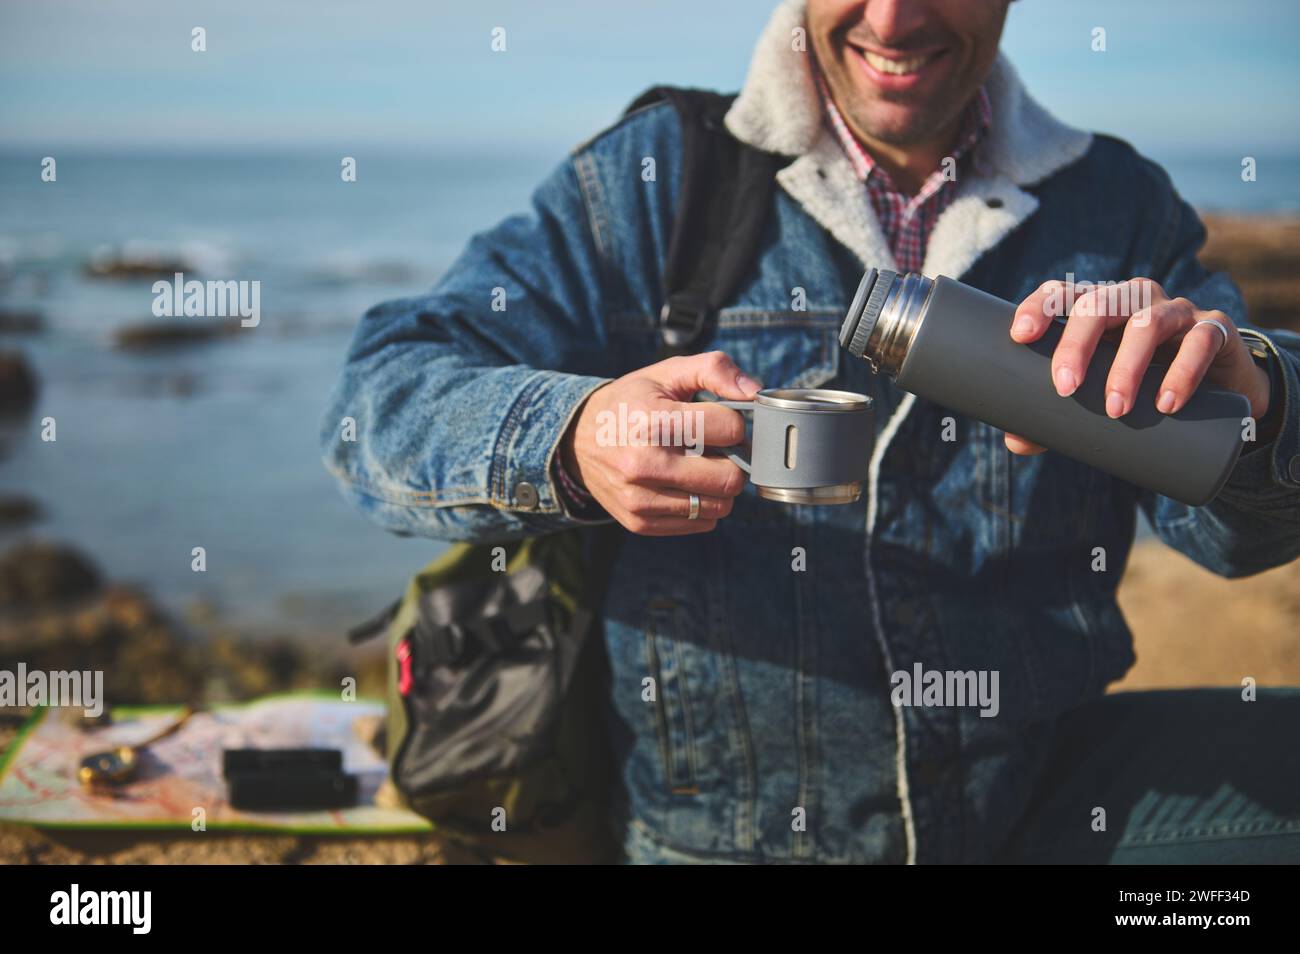 Happy smiling adventurer man in casual denim, pouring hot drink from a thermos flask into a stainless steel mug, sitting on a cliff by sea. Recreation Stock Photo